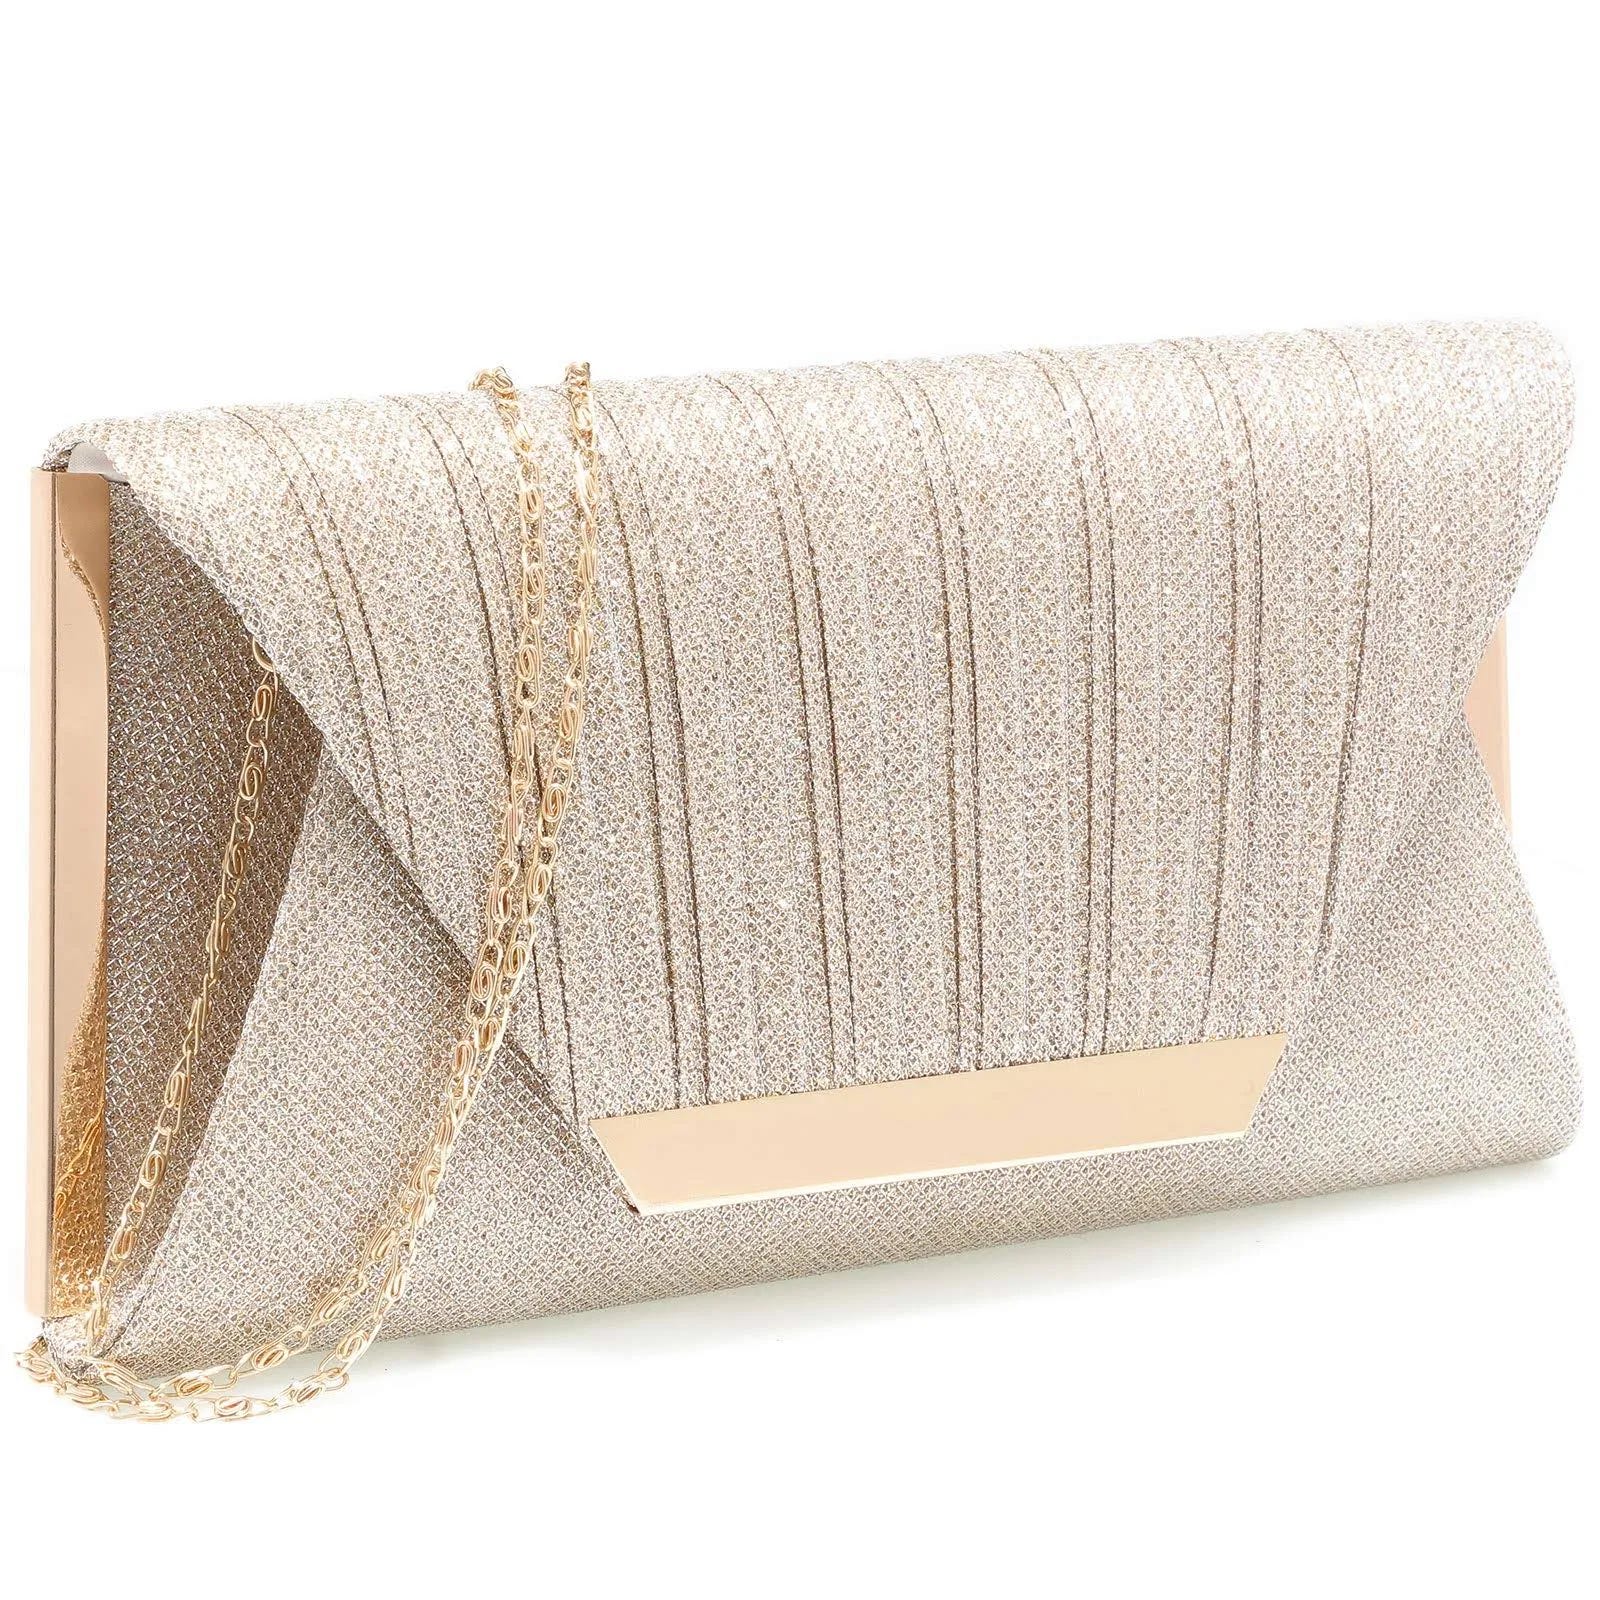 Mihawk Champagne Evening Clutch Purse for Women - Sparkling Mesh and Gold Accents | Image